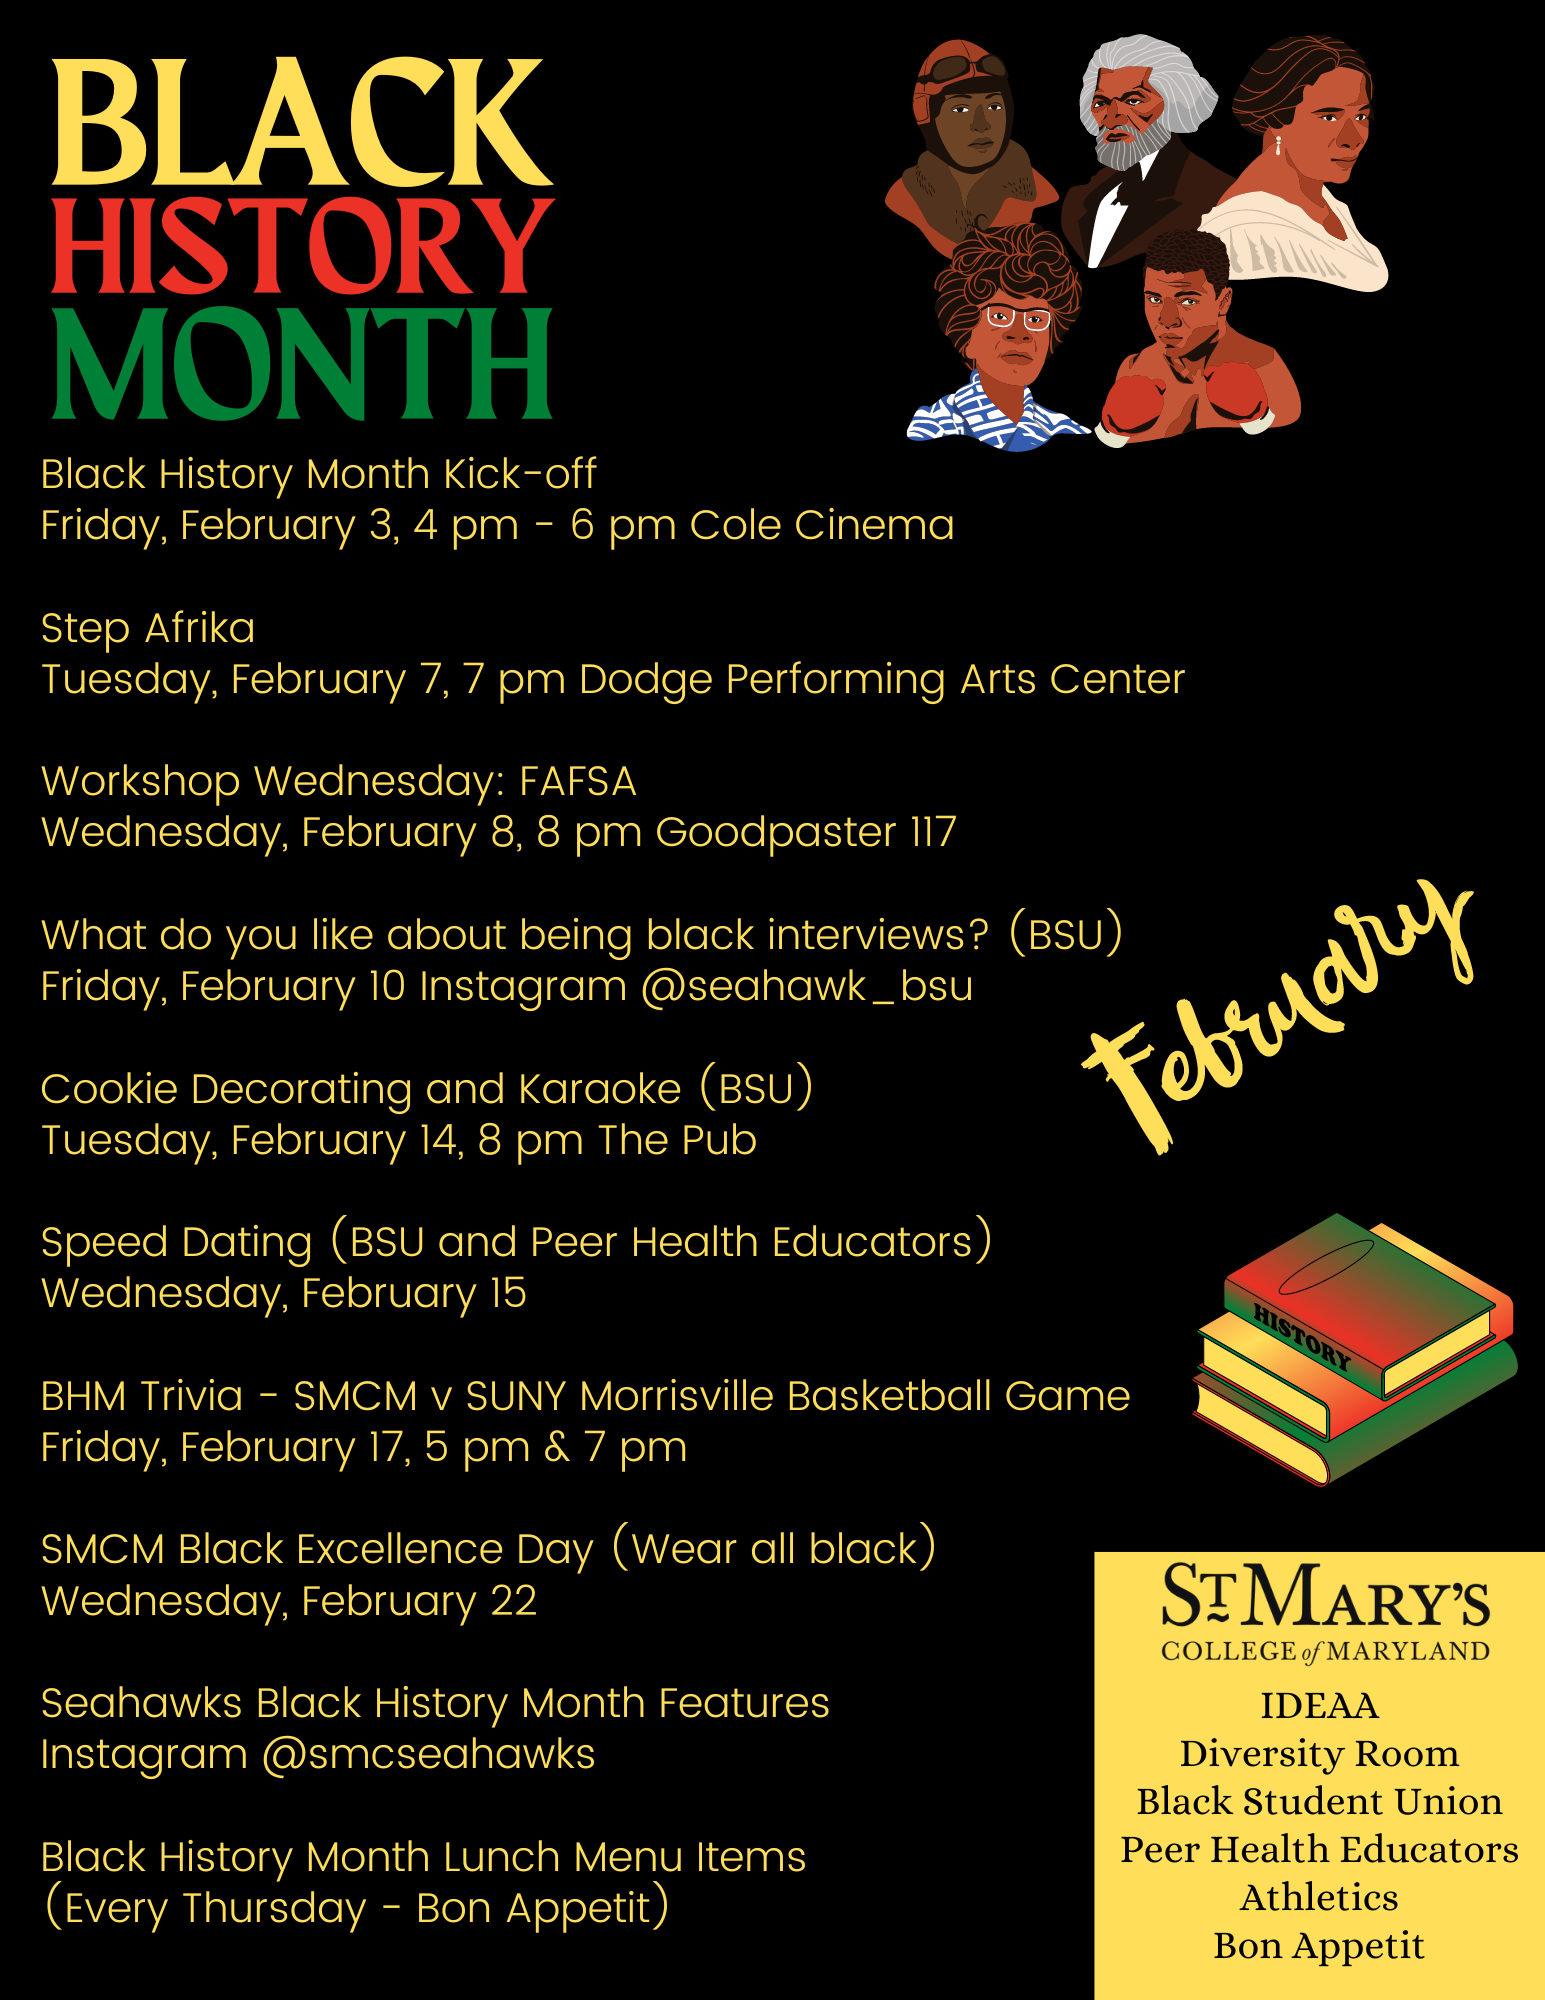 Black History Month Calendar St Marys College of Maryland